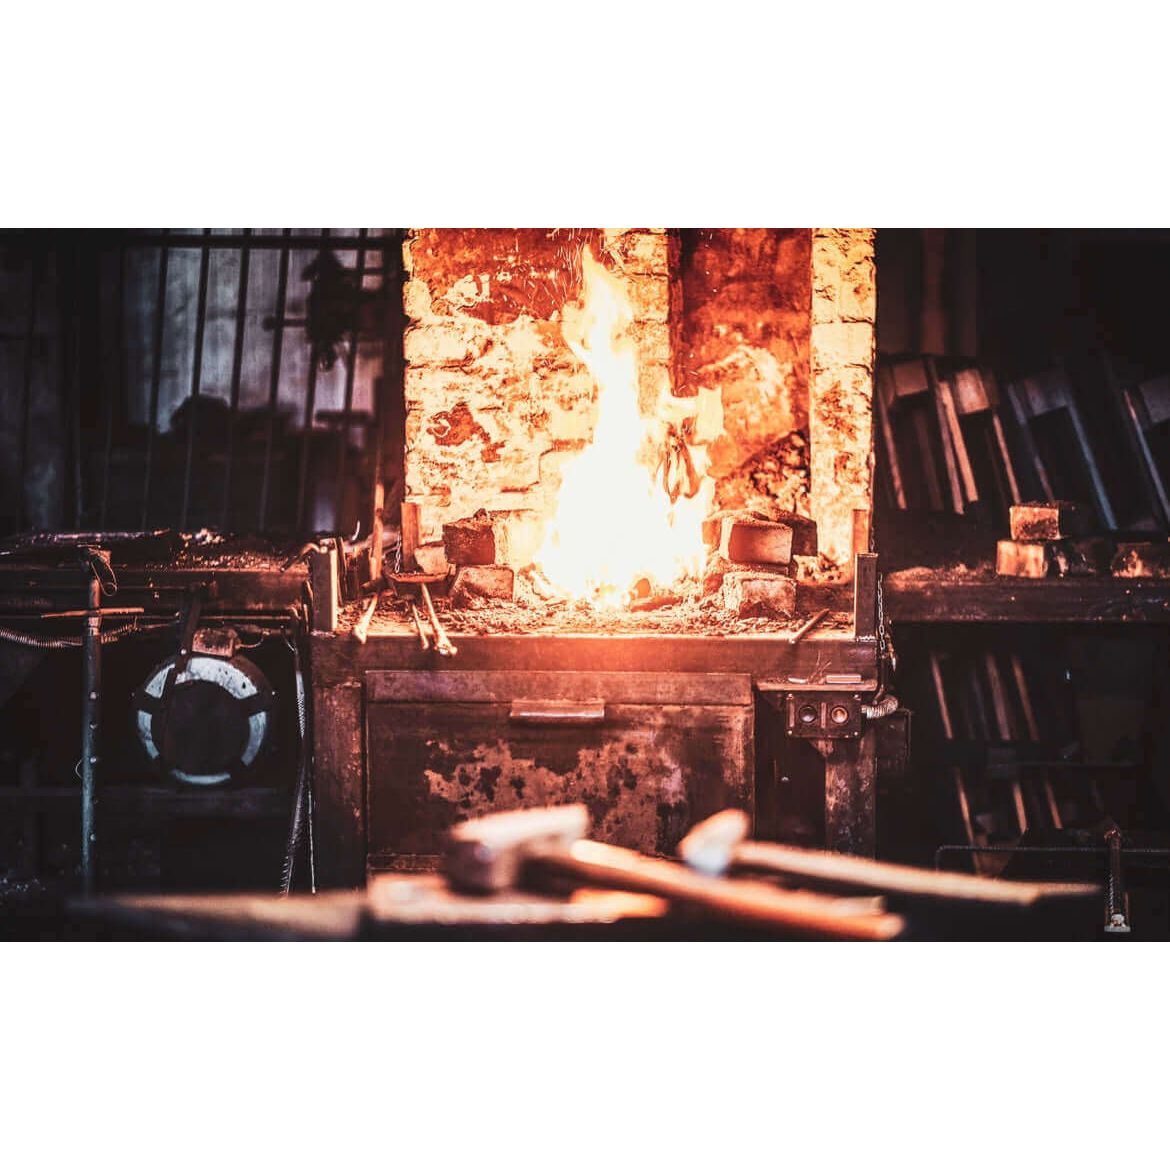 Blacksmith 101 Class Forge and Fire in background